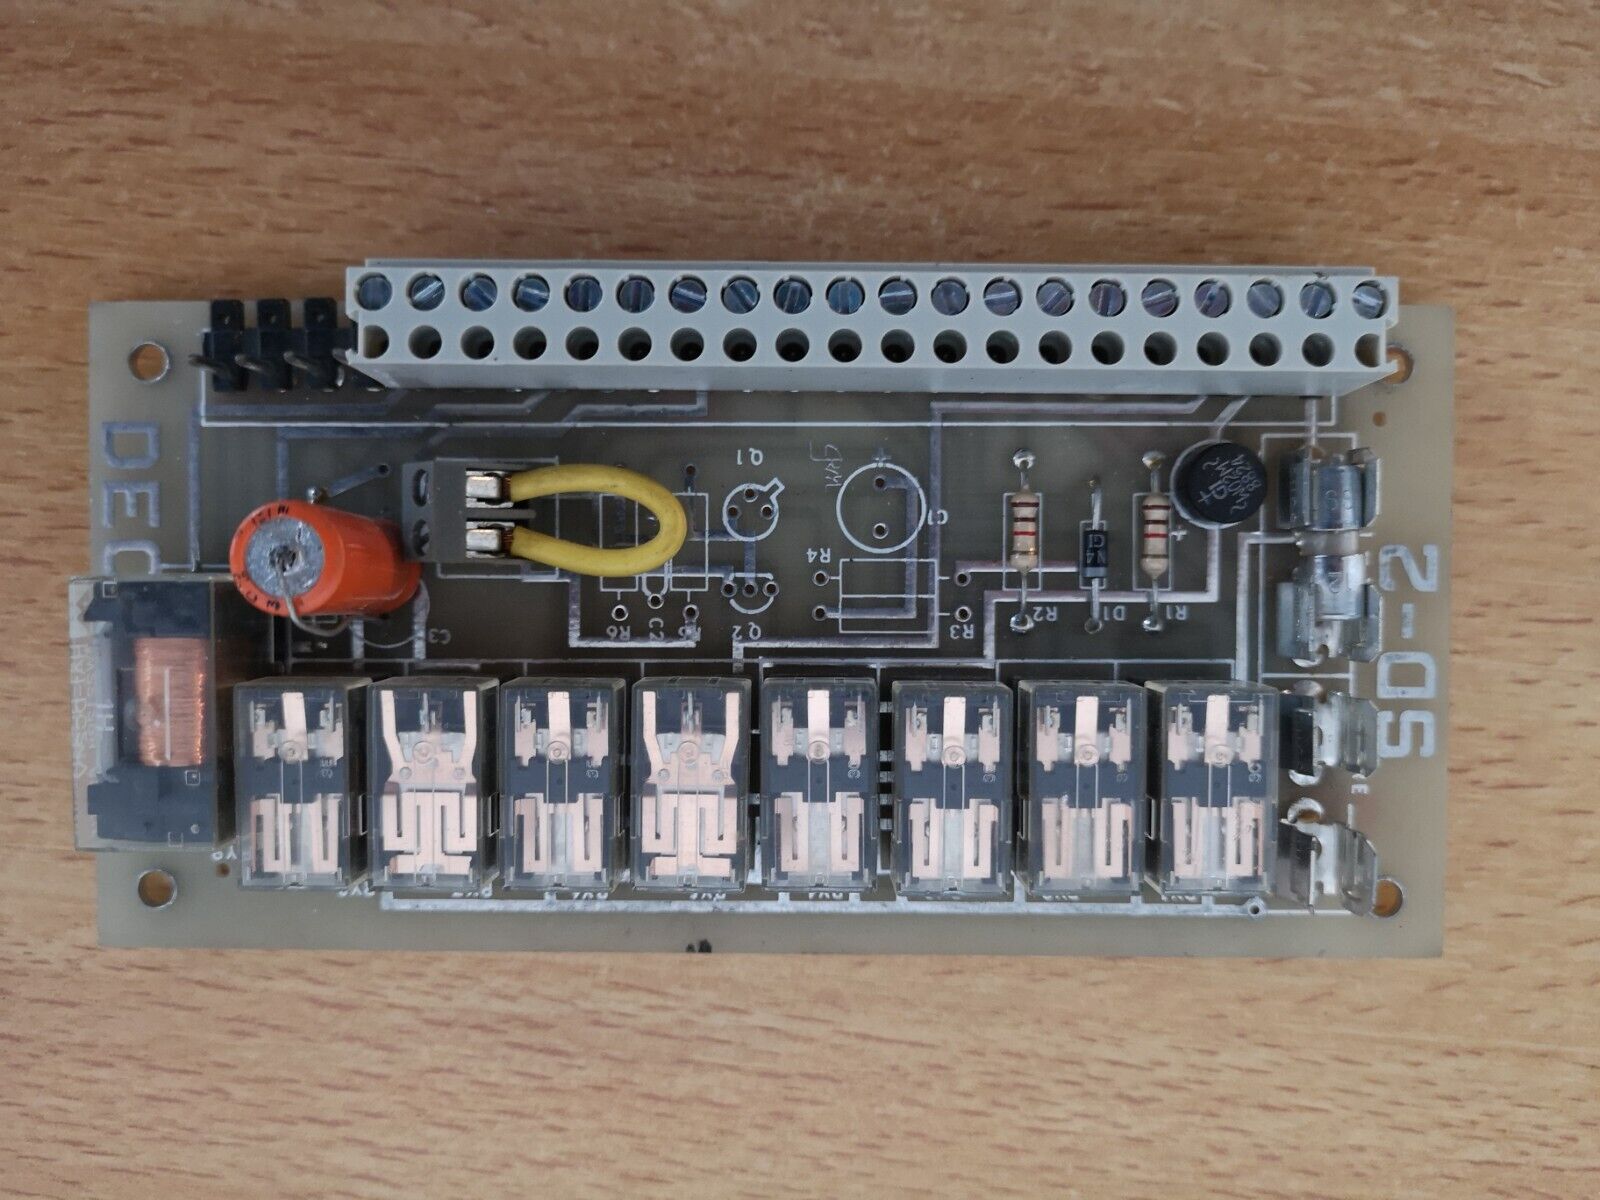 Dectro SD2 control board used on older unit from 1976-1986